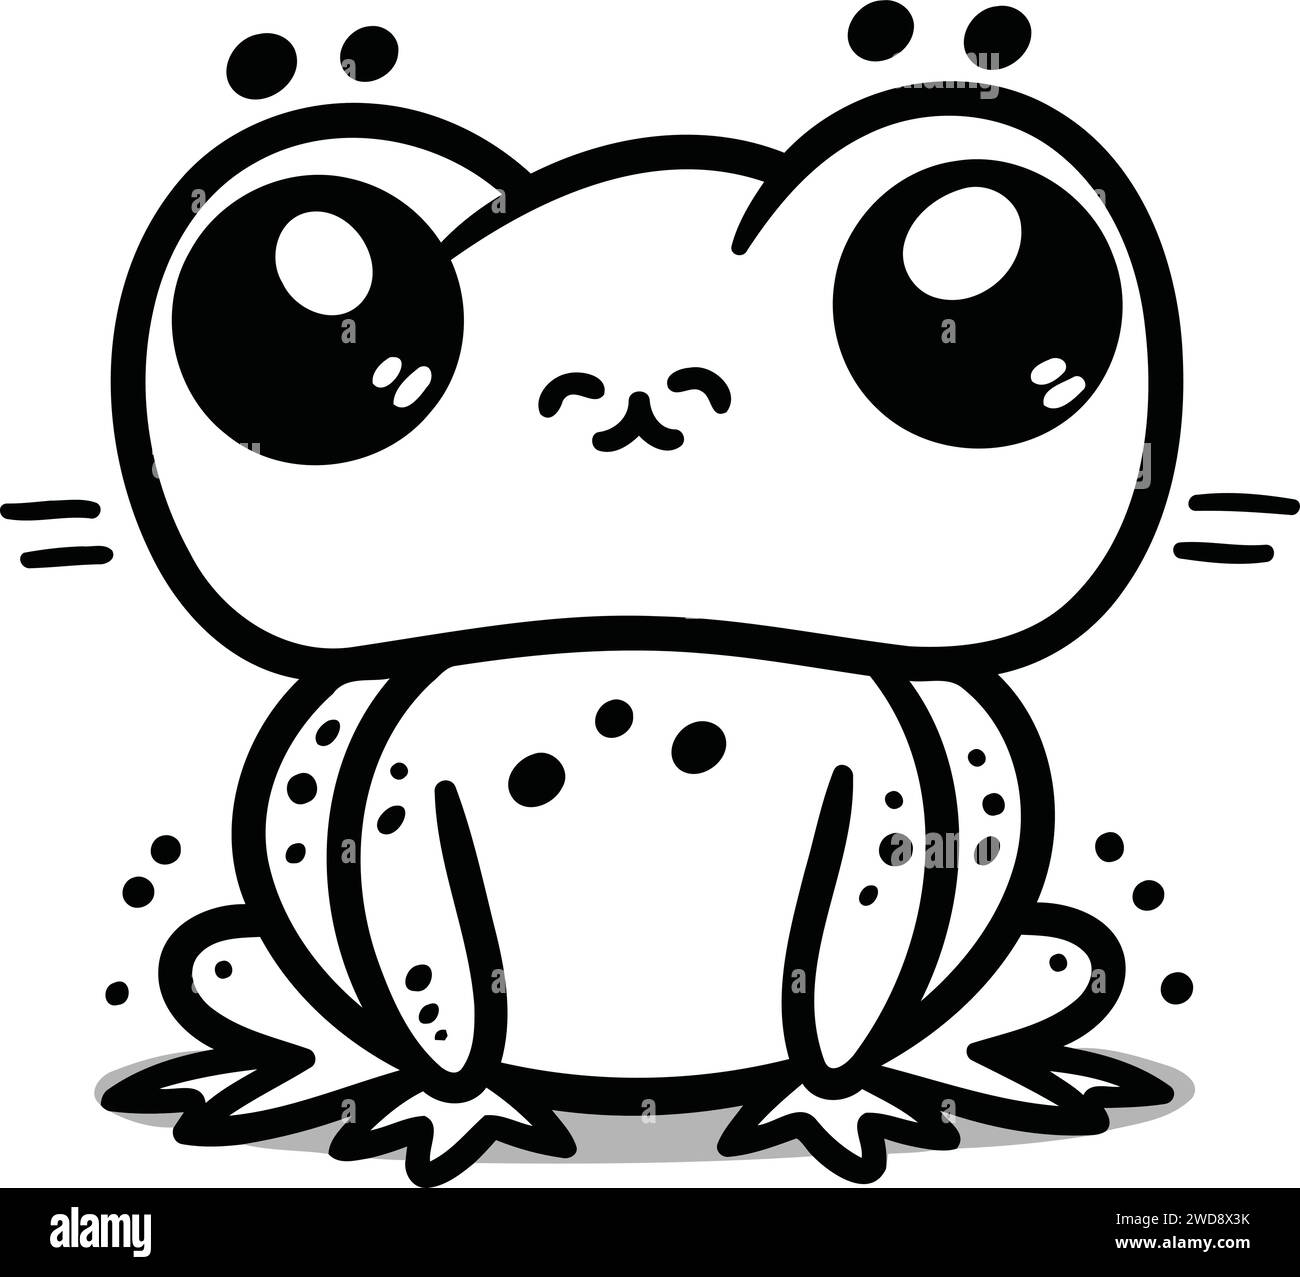 Cute cartoon frog. Vector illustration isolated on a white background. Stock Vector